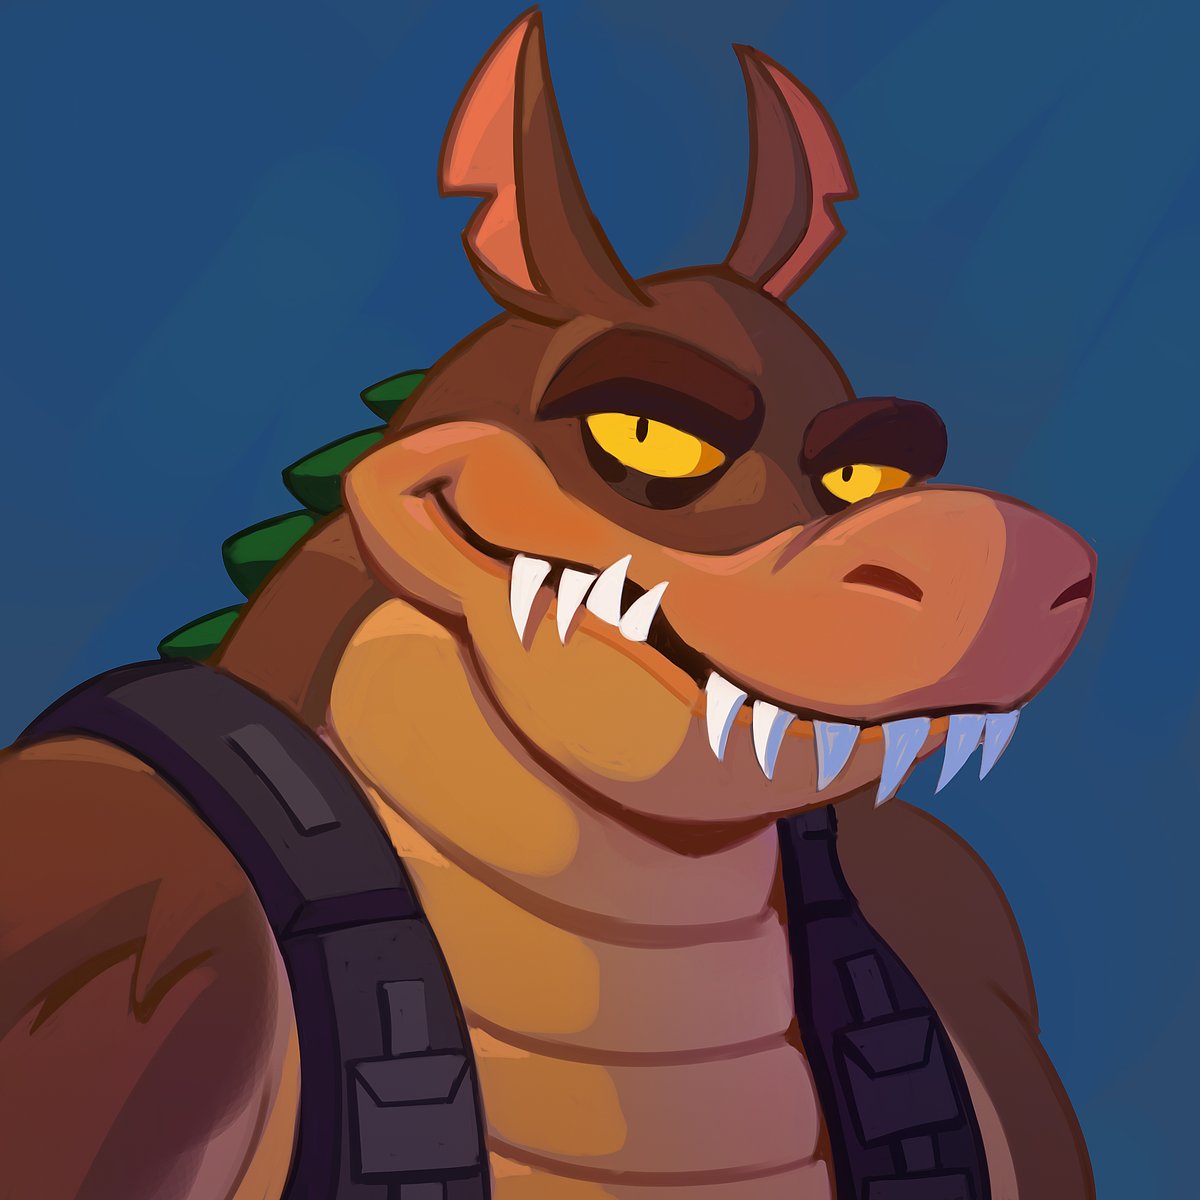 fanart of dingodile, I love his personality, leave in the comments what you think of the dingodile 

I'm with open icon commissions, anyone who is interested call me at DM

#CrashBandicoot #CrashBandicootFanArt #CrashBandicoot4 #fanart #commissions